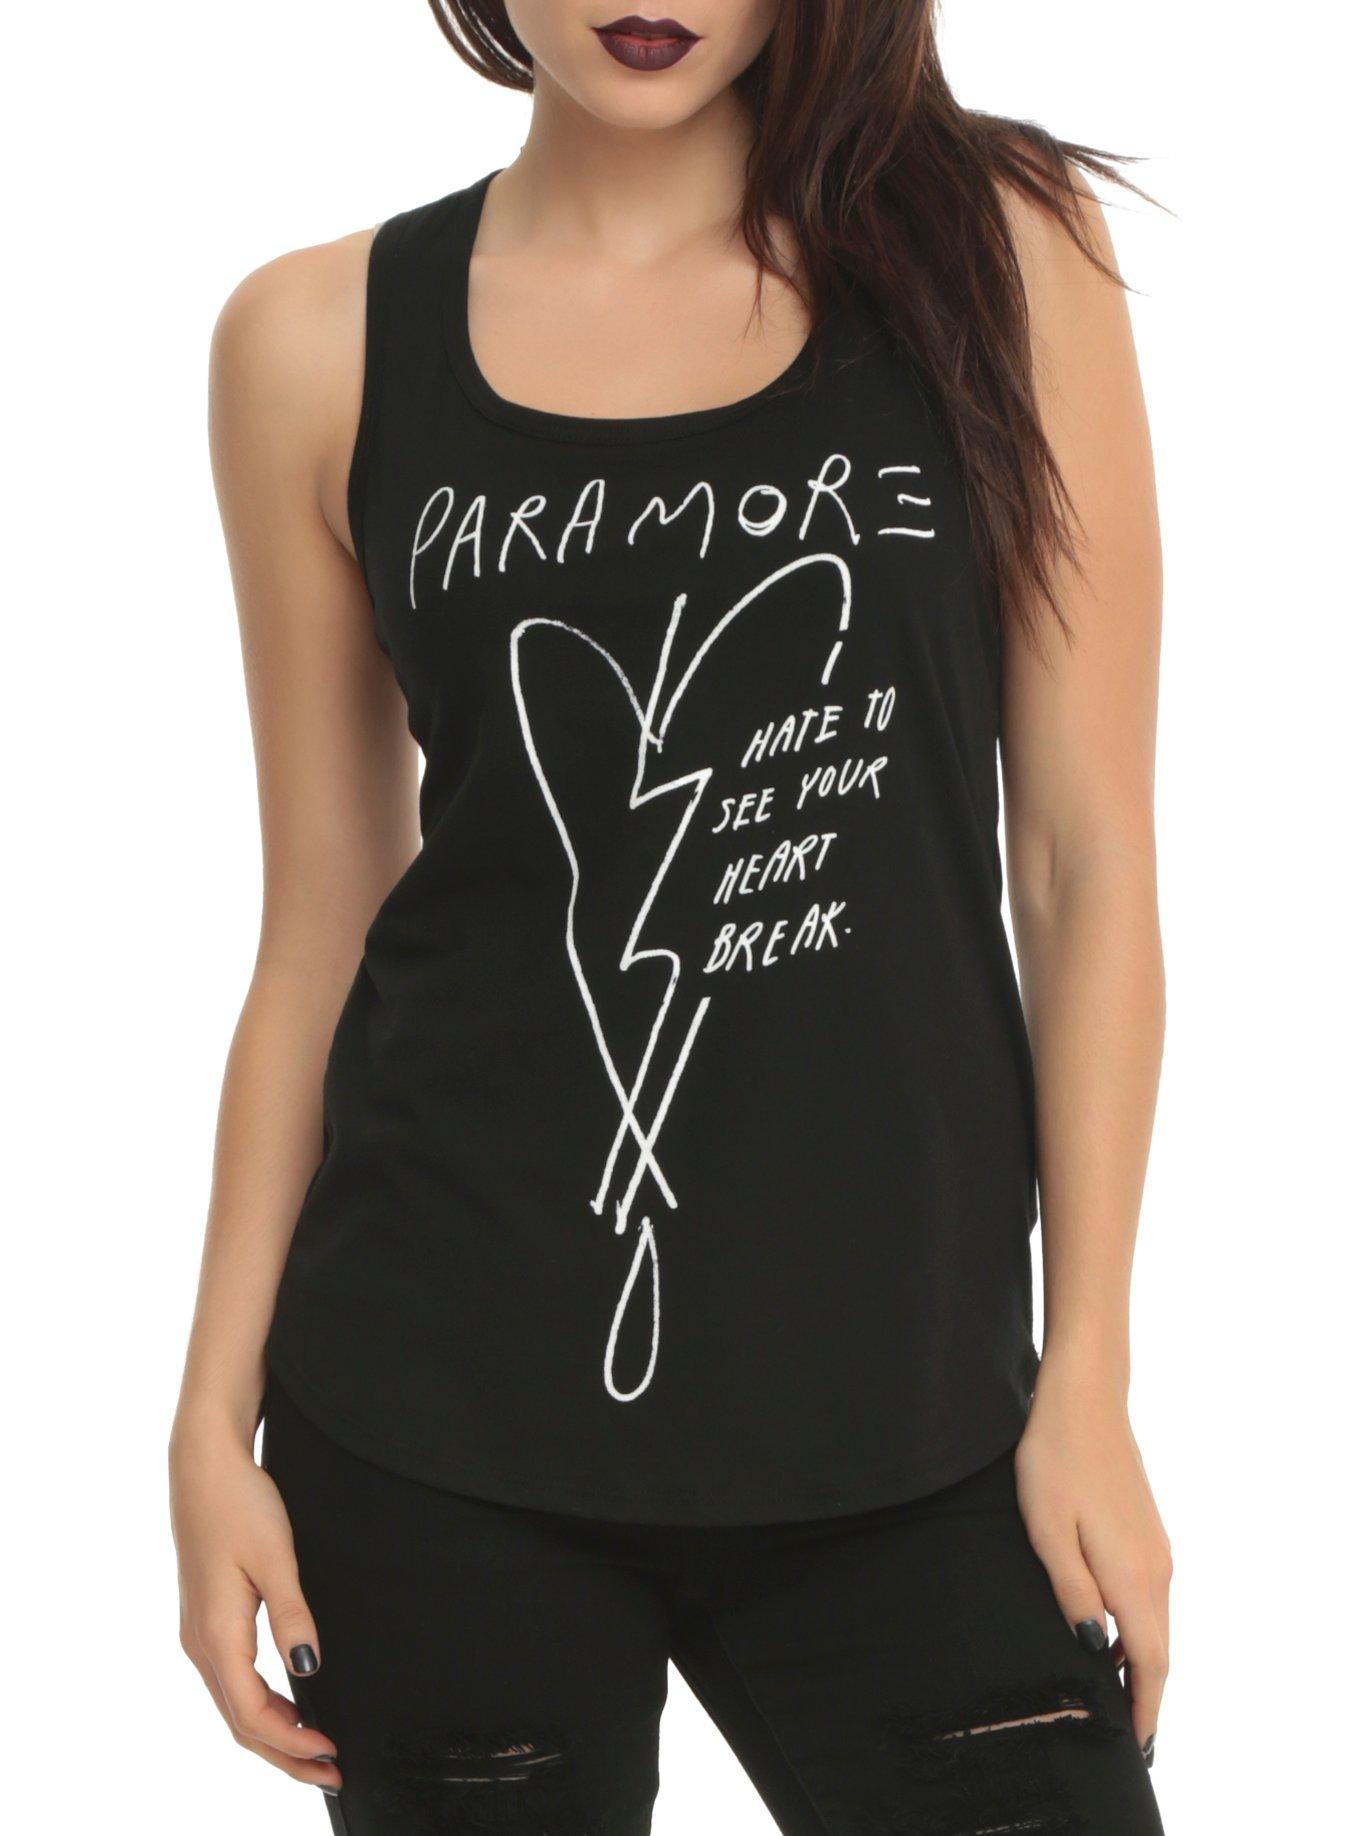 Paramore Hate To See Your Heart Break Girls Tank Top, BLACK, hi-res